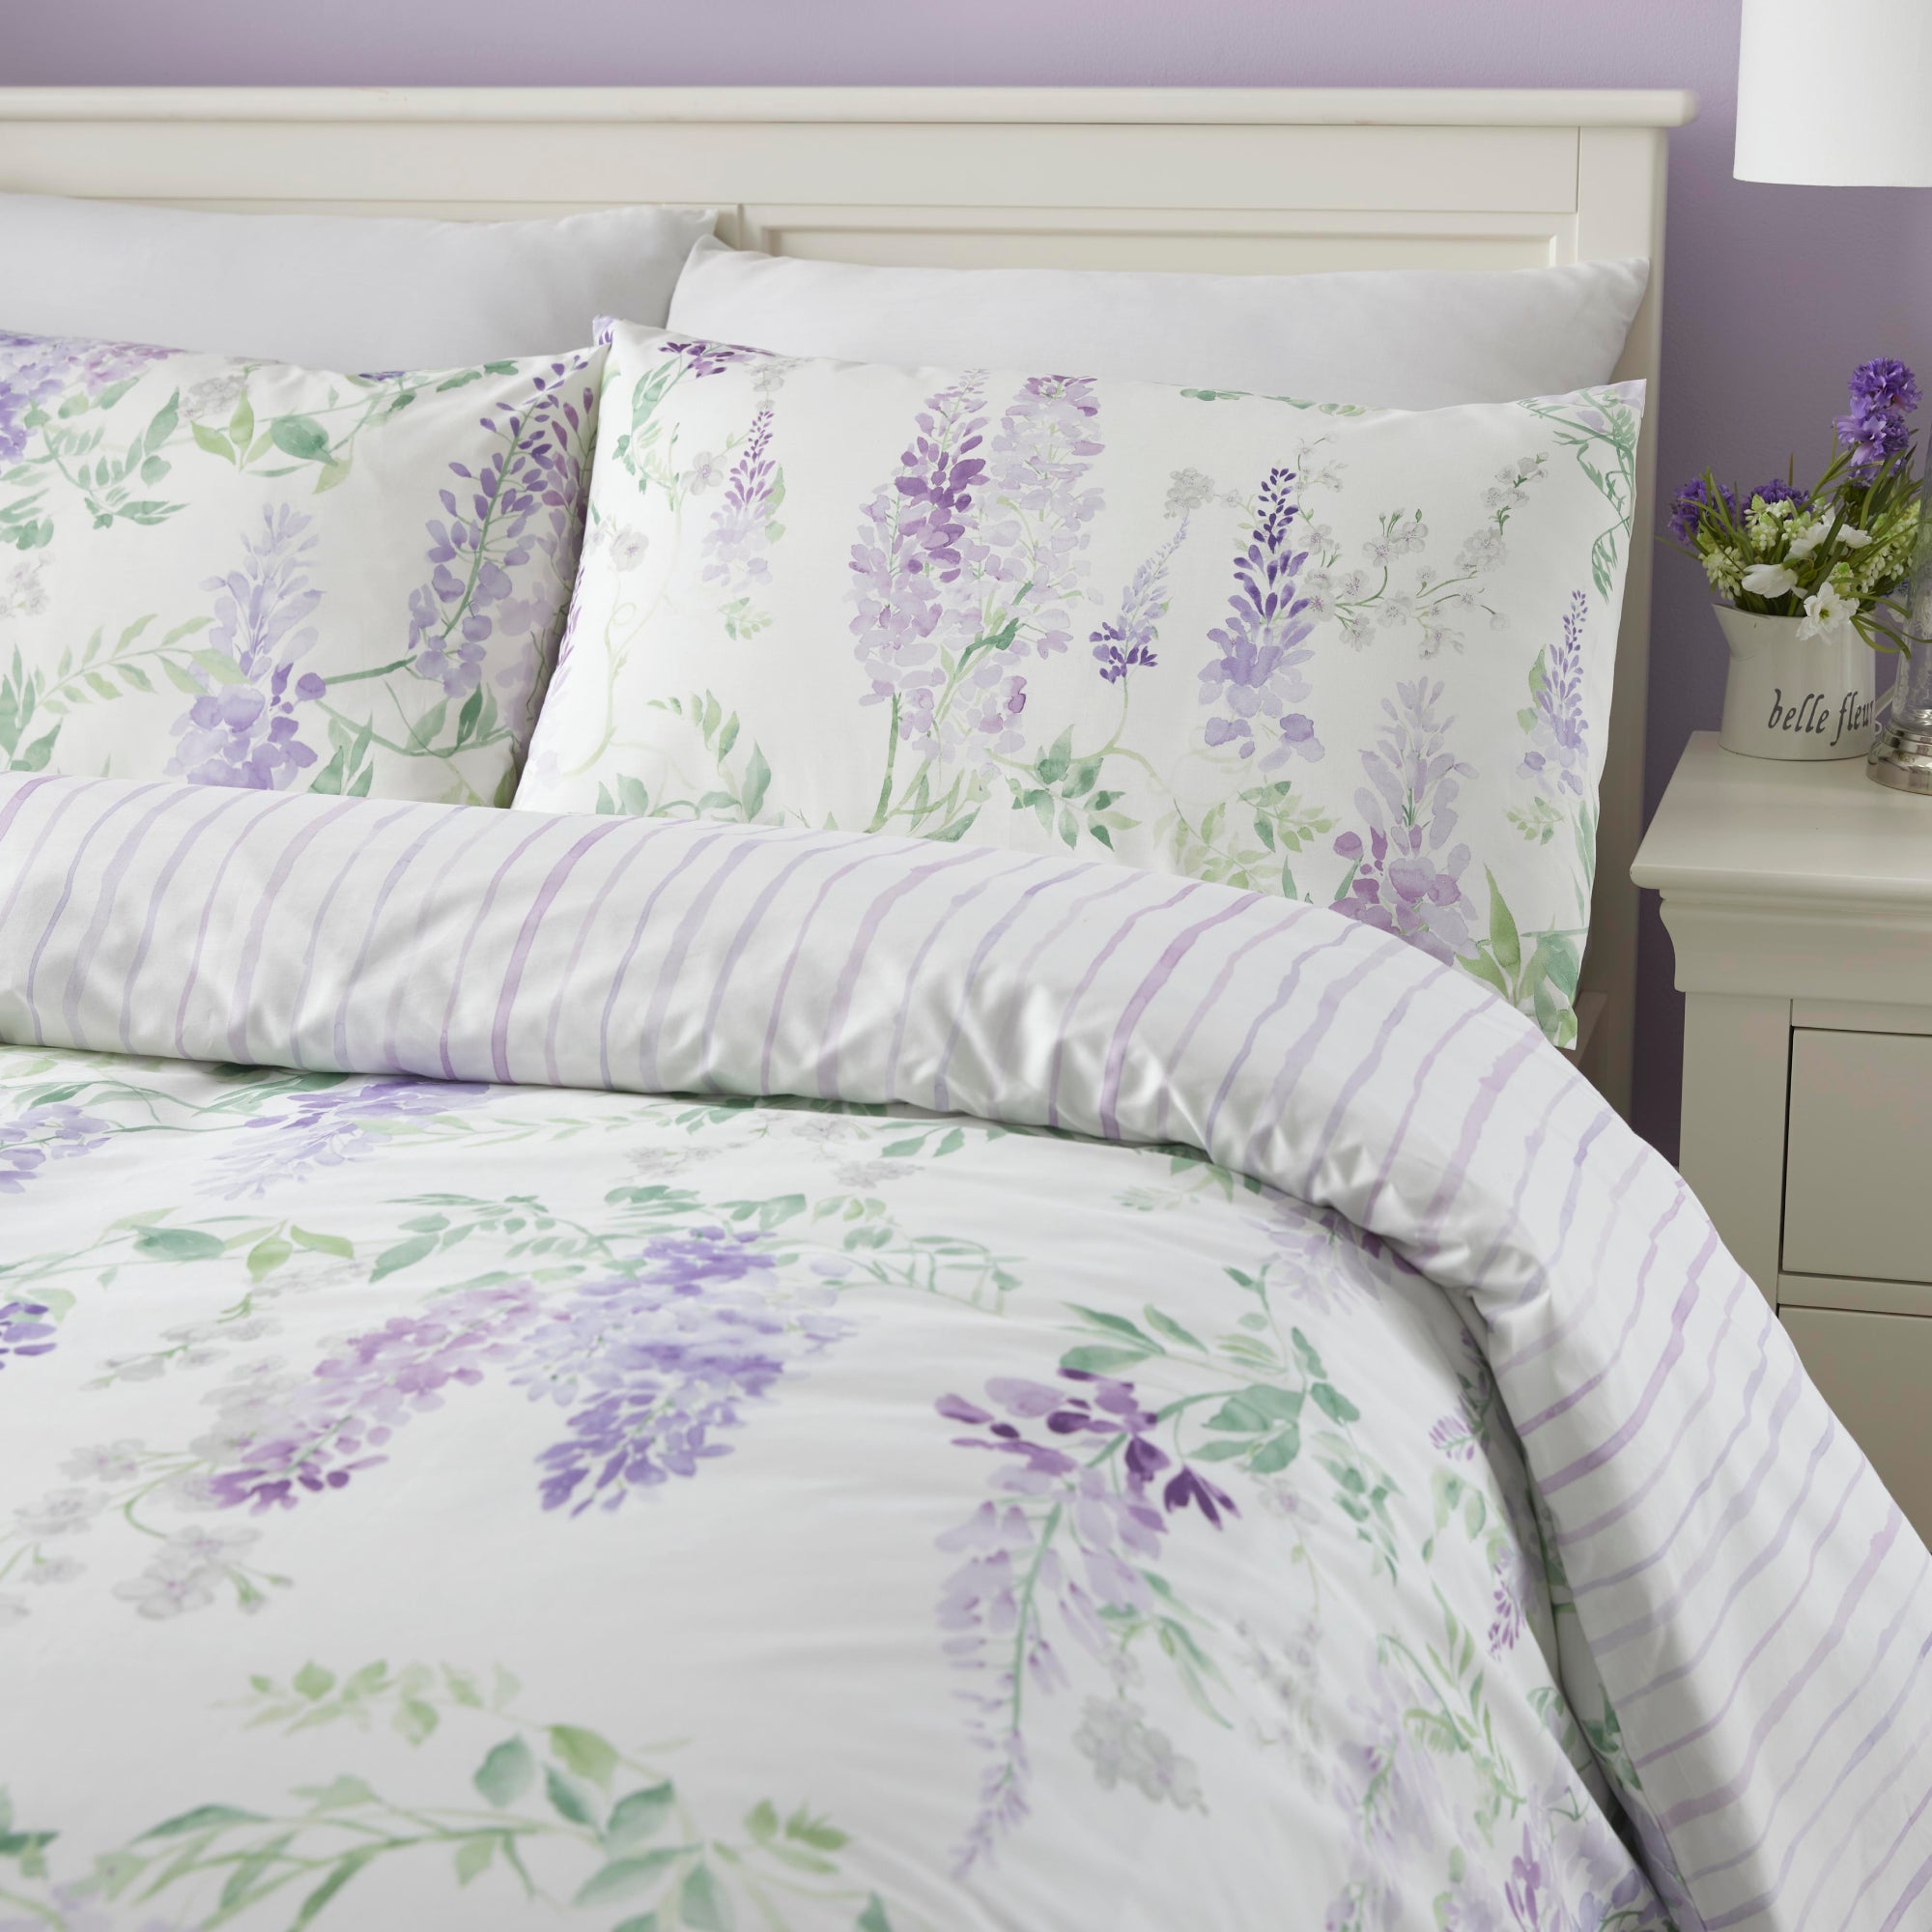 Duvet Cover Set Wisteria by Dreams & Drapes Design in Lilac